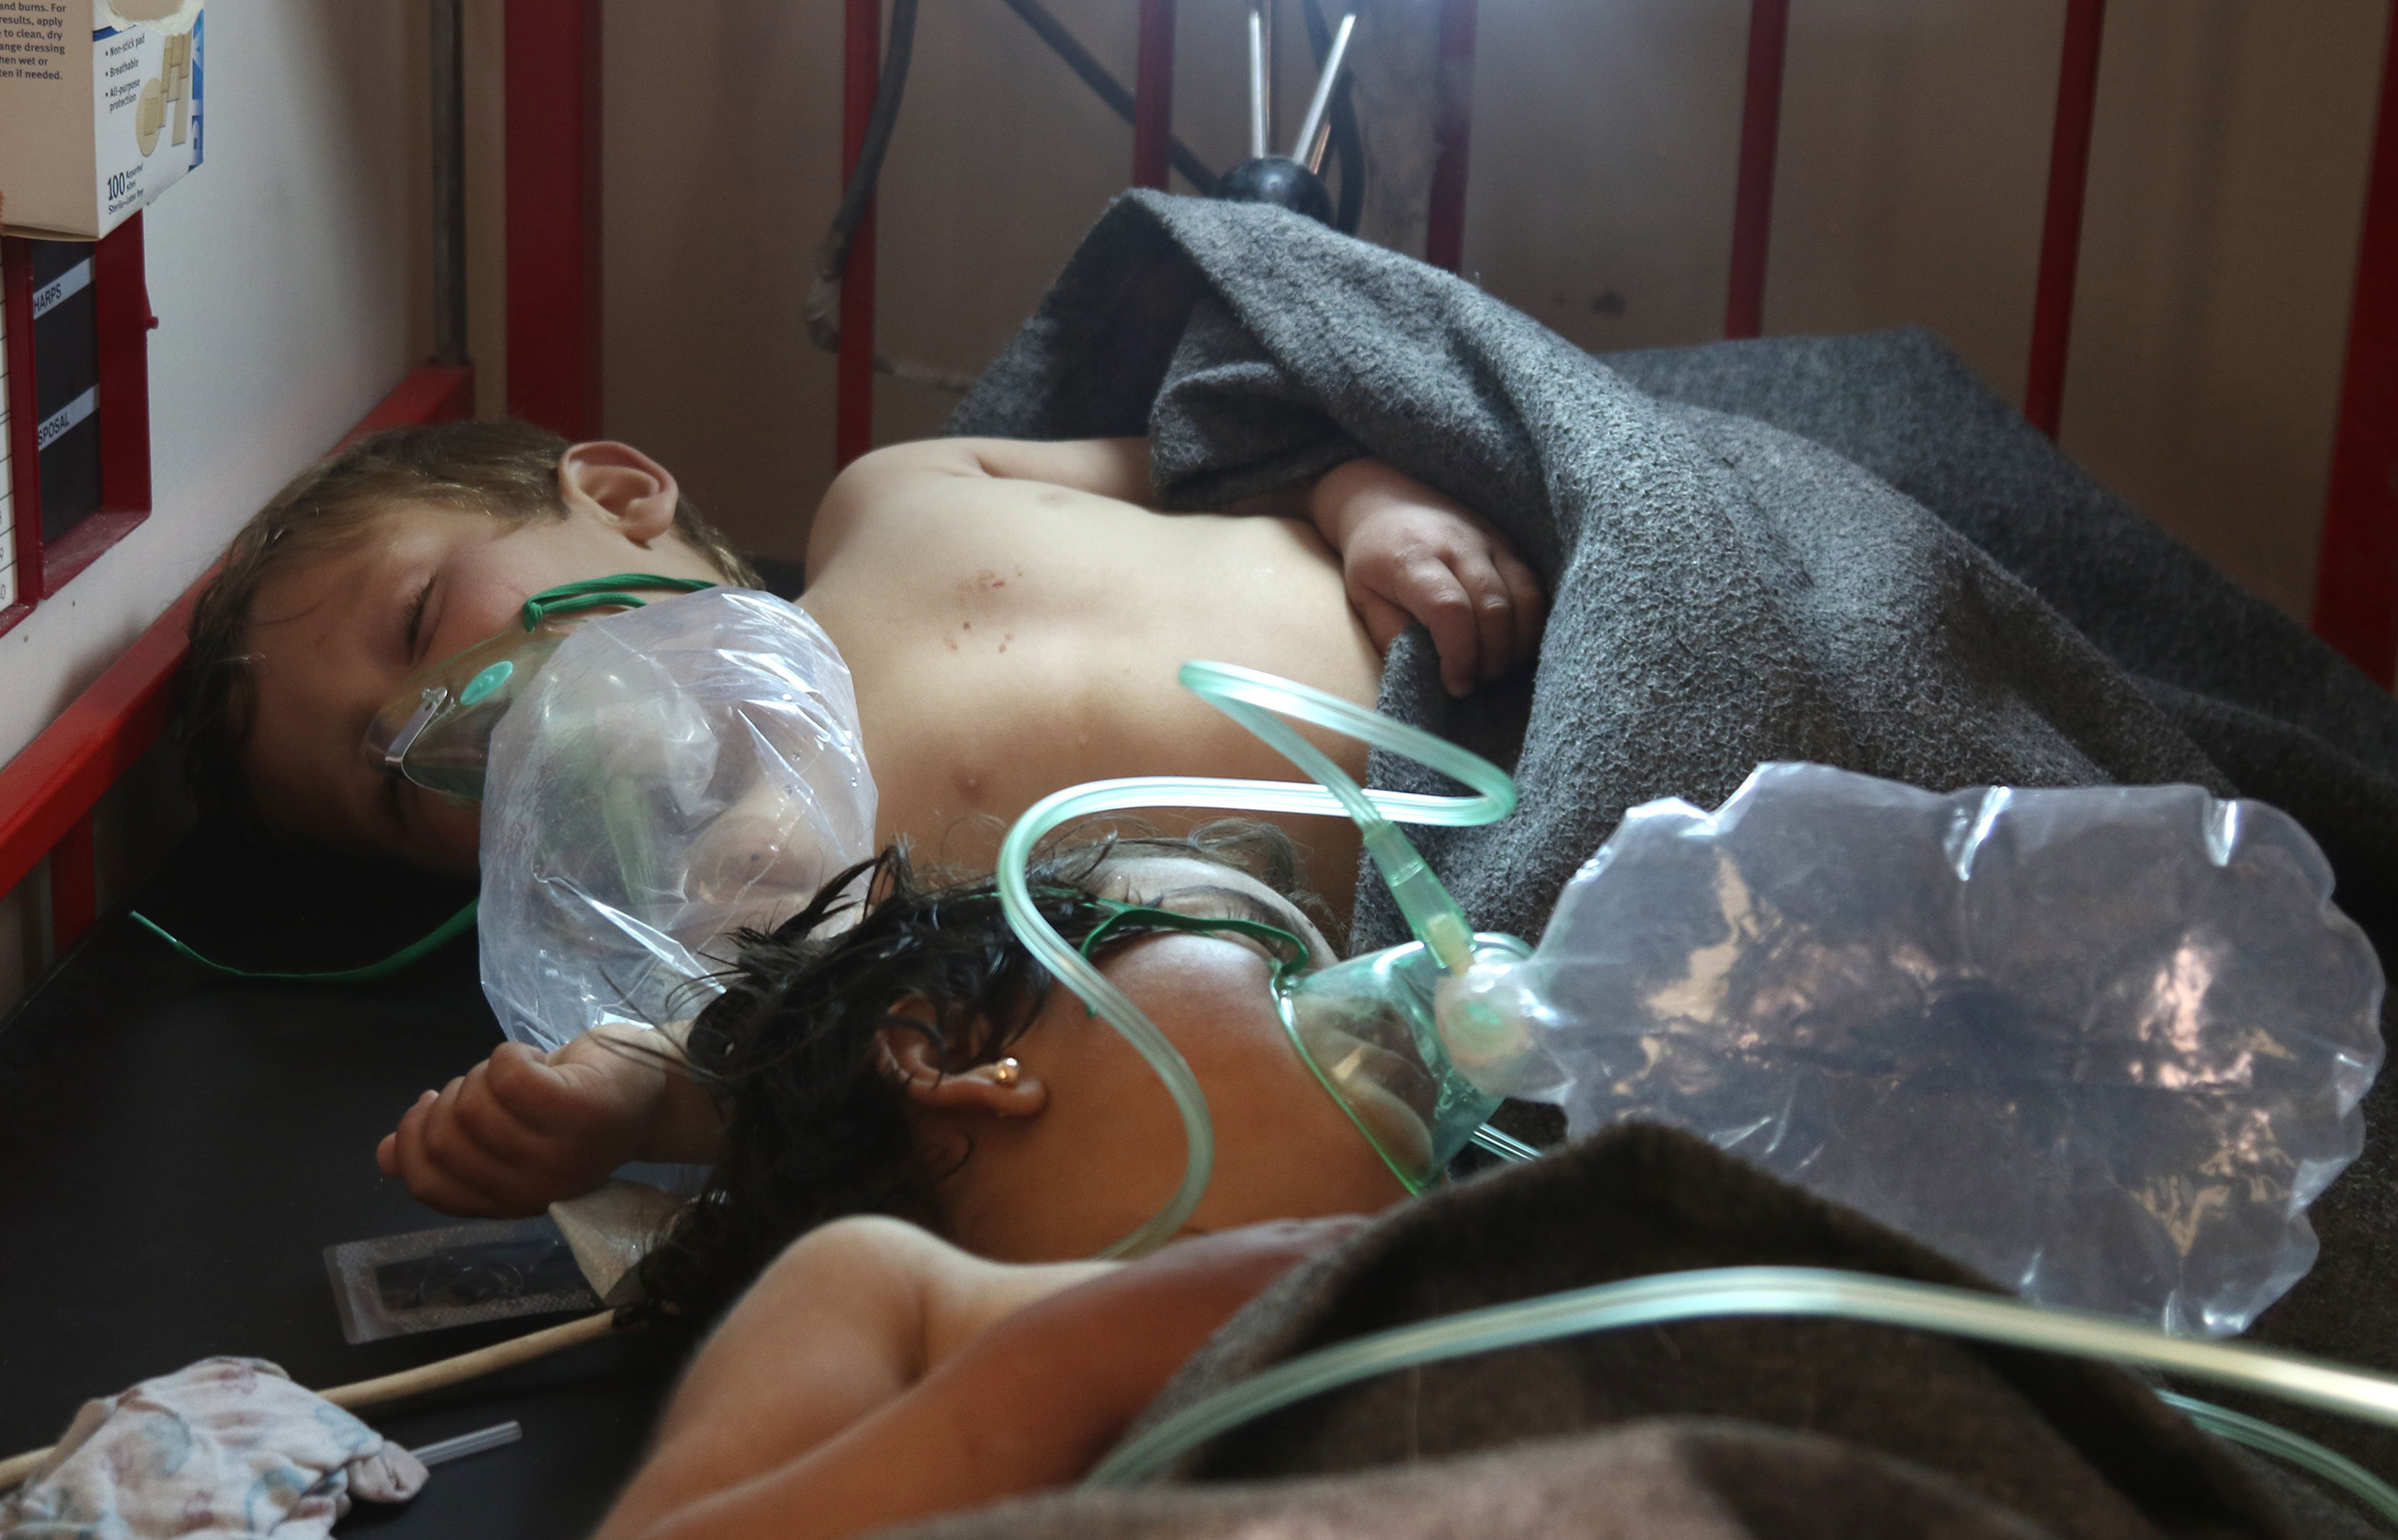 Syrian children receive treatment at a small hospital in the town of Maaret al-Noman following a suspected toxic gas attack in Khan Sheikhun, a nearby rebel-held town in Syrias northwestern Idlib province, on April 4, 2017.